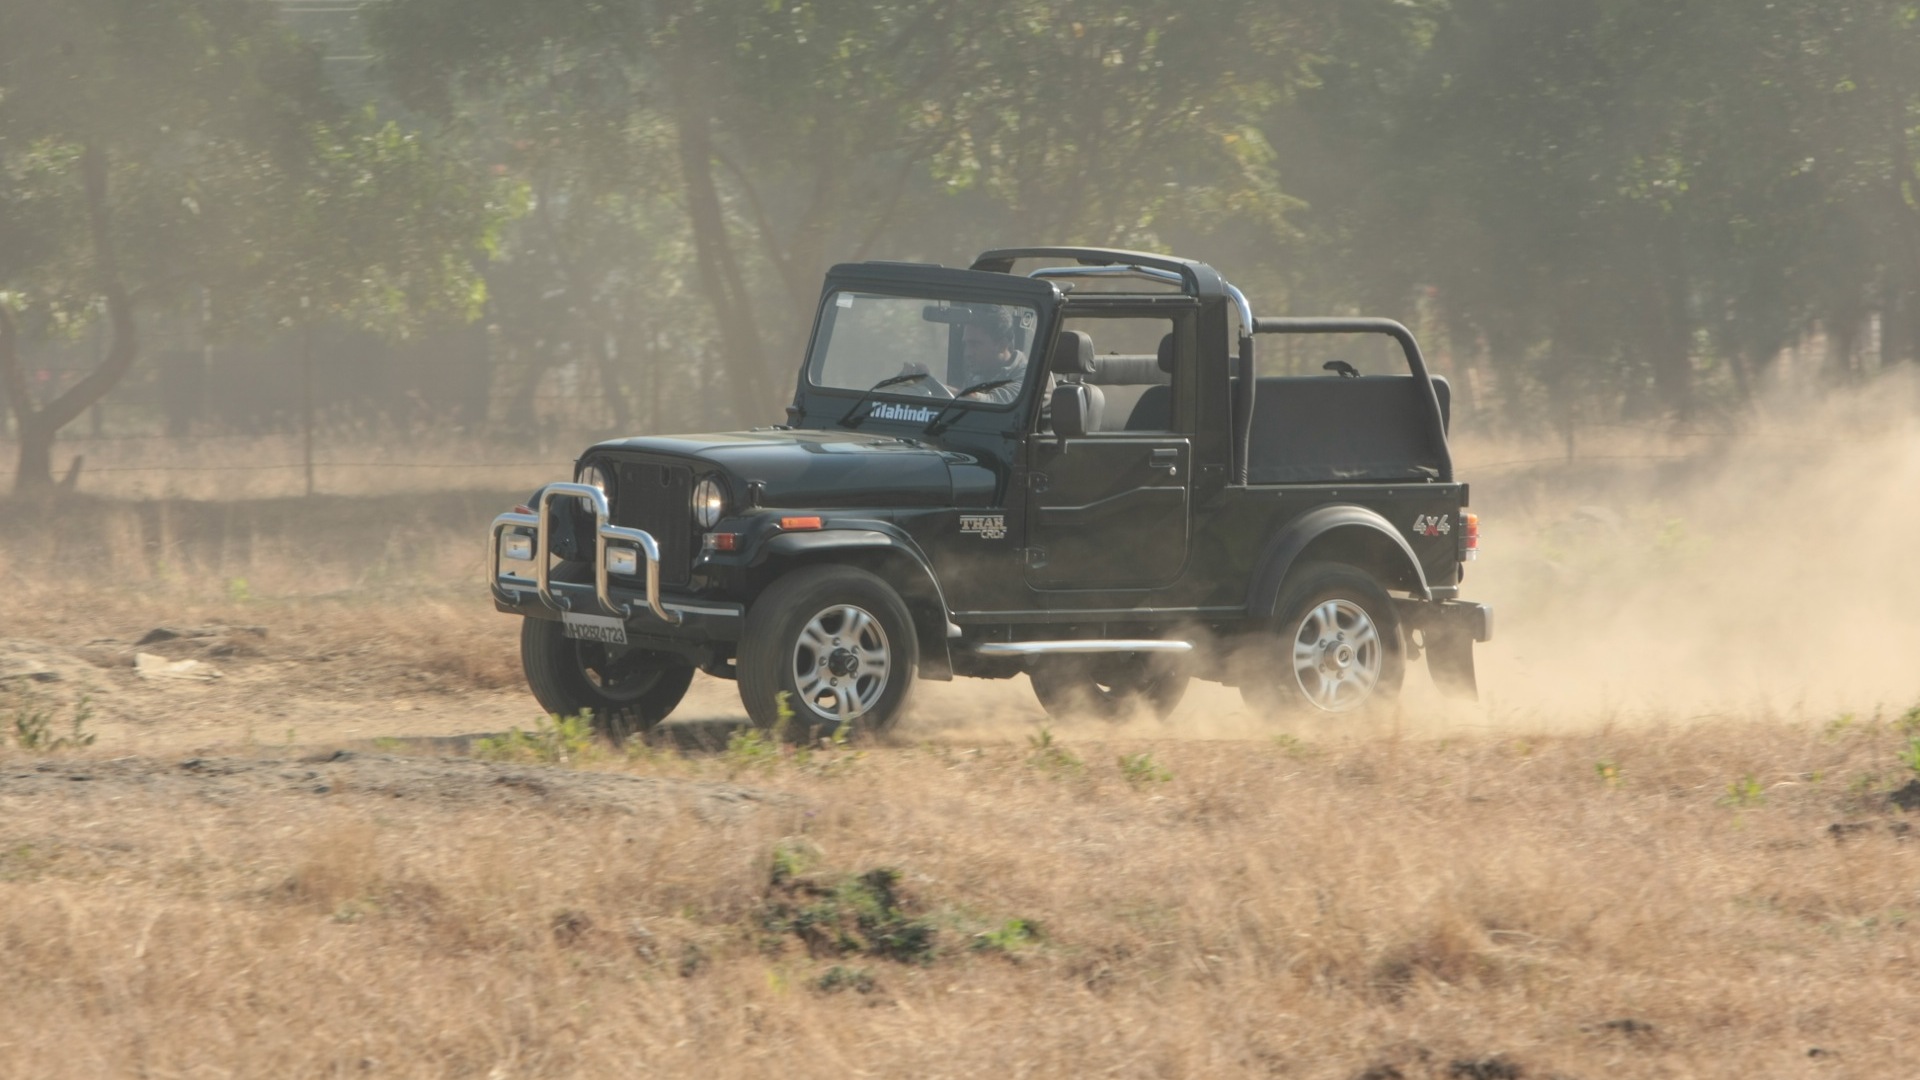 Discontinued Thar AX 6-STR Soft Top Diesel MT on road Price  Mahindra Thar  AX 6-STR Soft Top Diesel MT Features & Specs